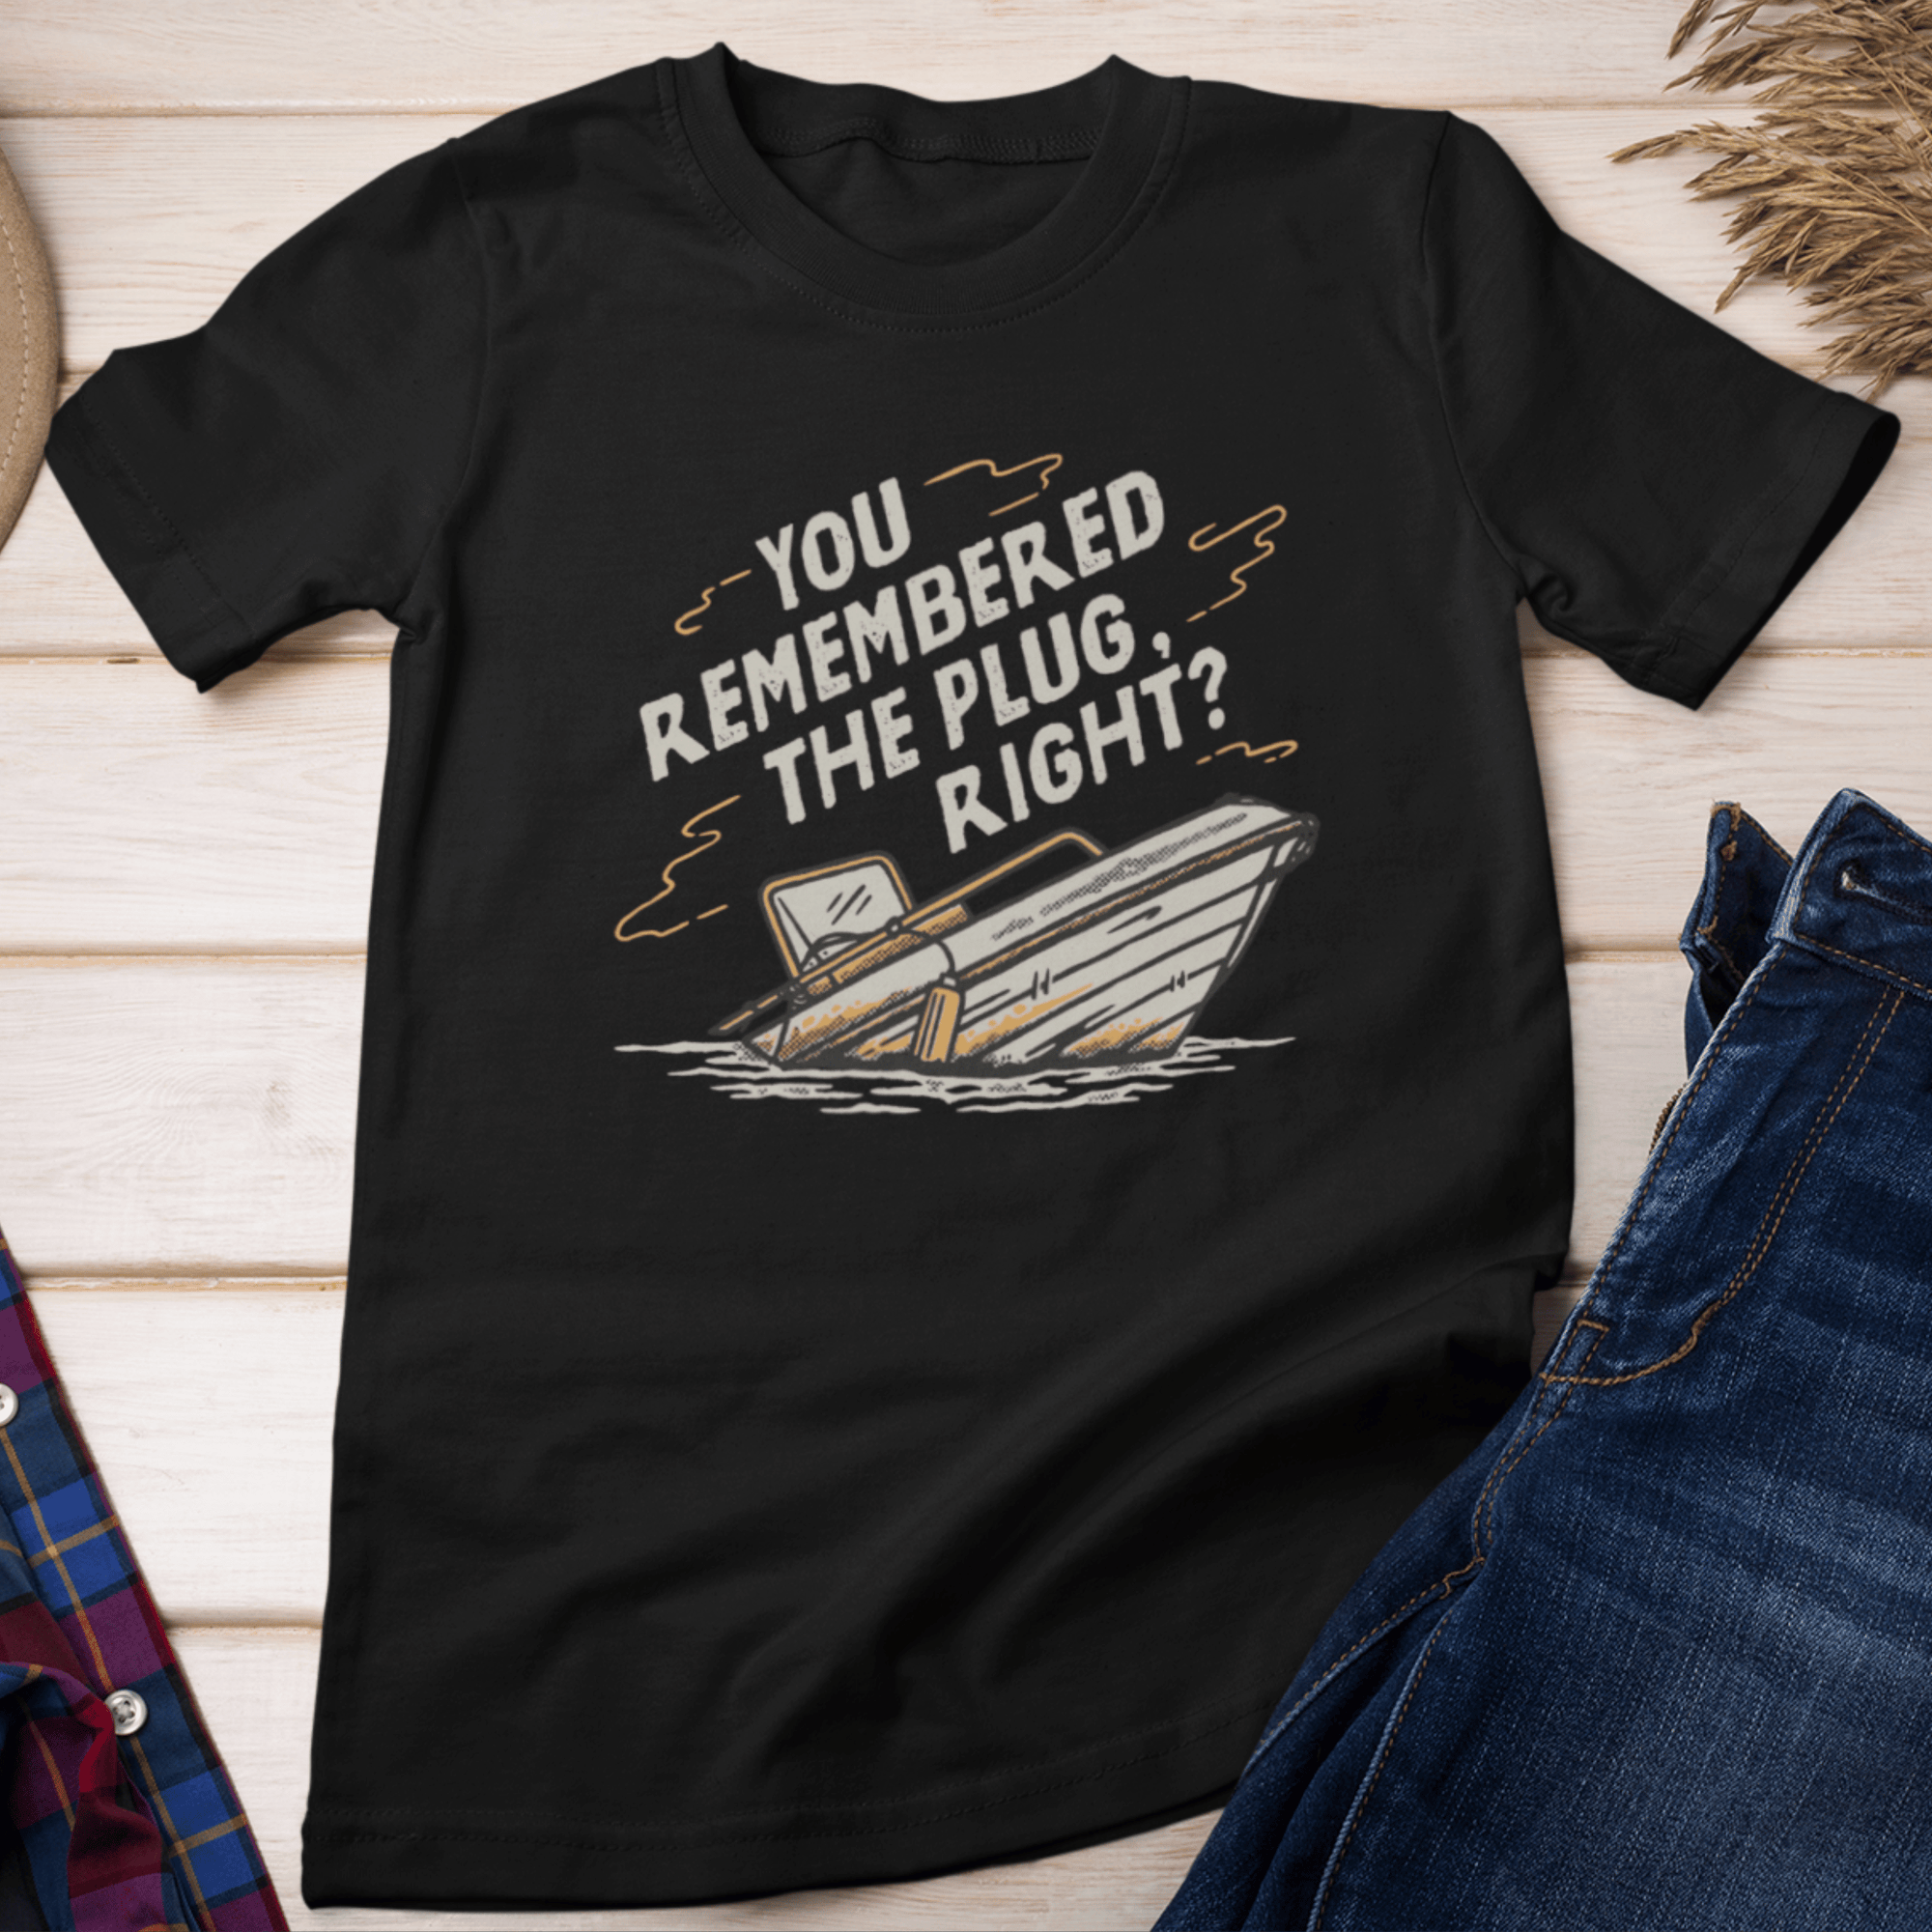 You Remembered The Plug, Right? T-Shirt